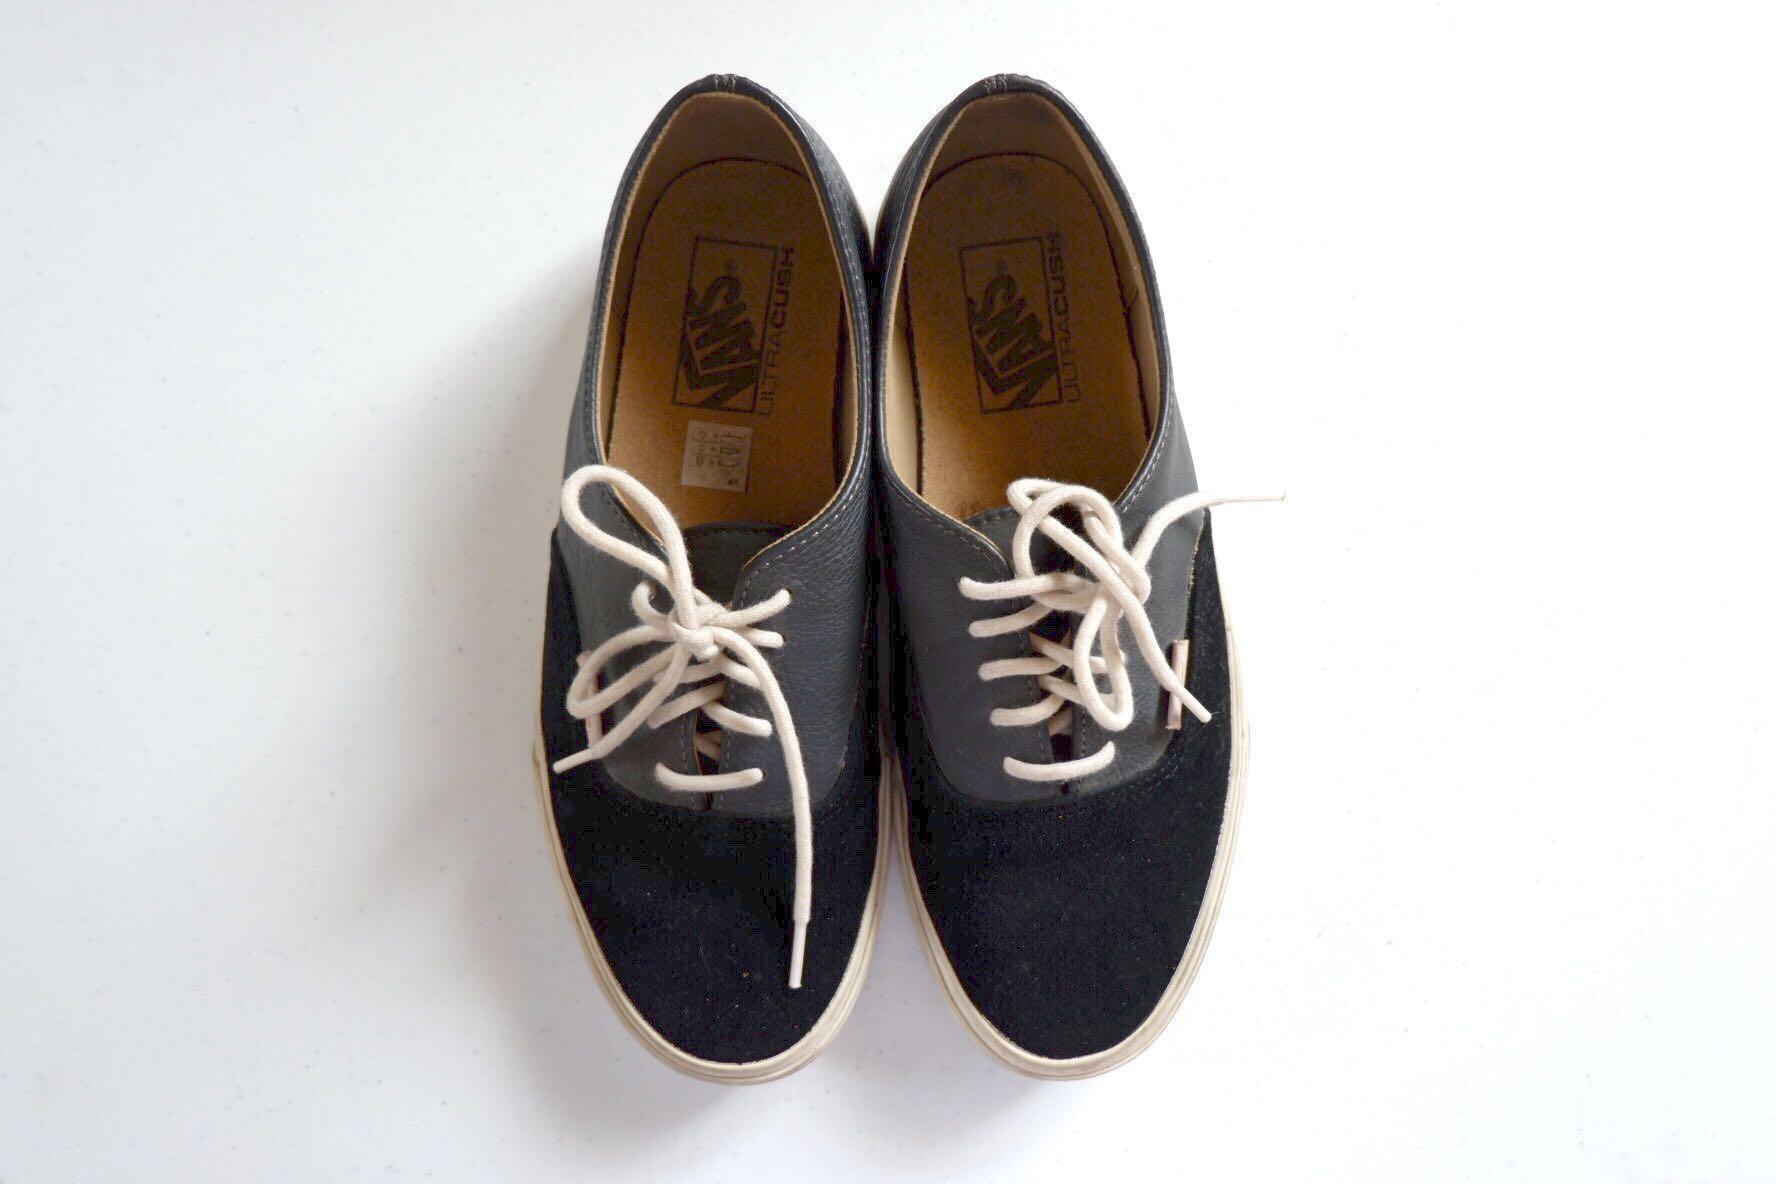 Charcoal Suede/Leather (AUTHENTIC 